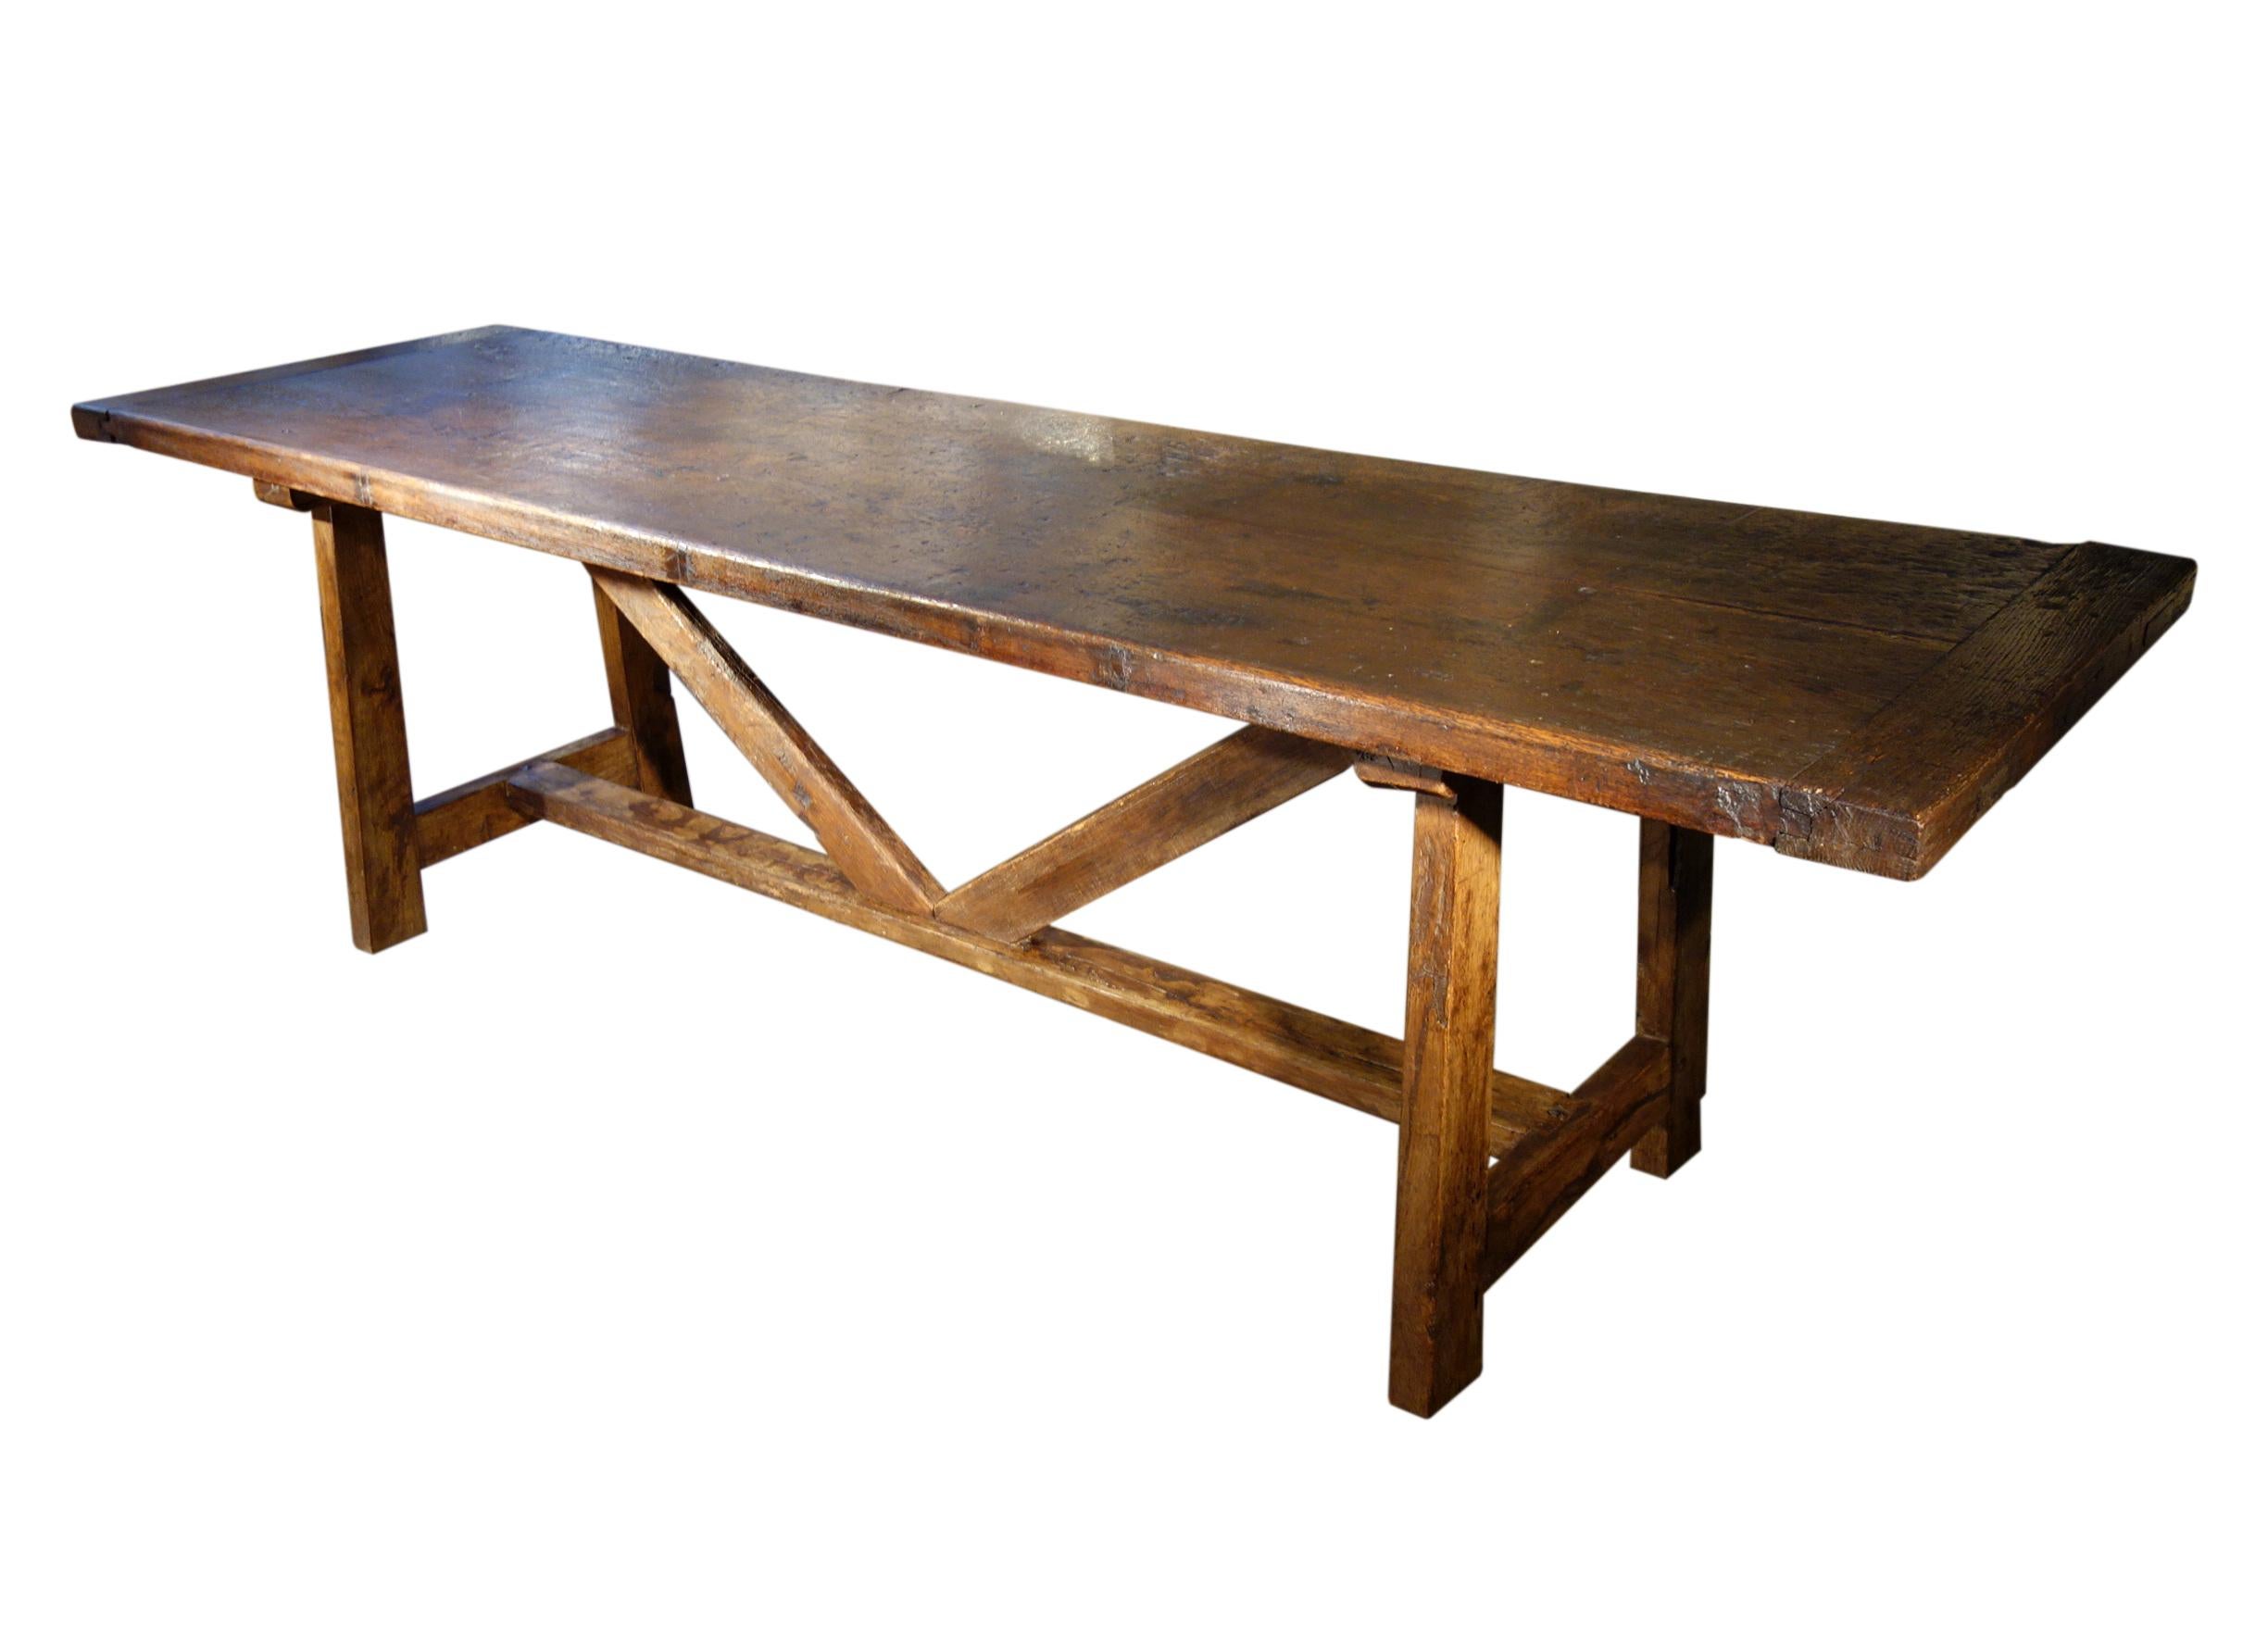 Forged Late 17th C Italian Chestnut Trestle Table Available Custom Reproduction Sizes